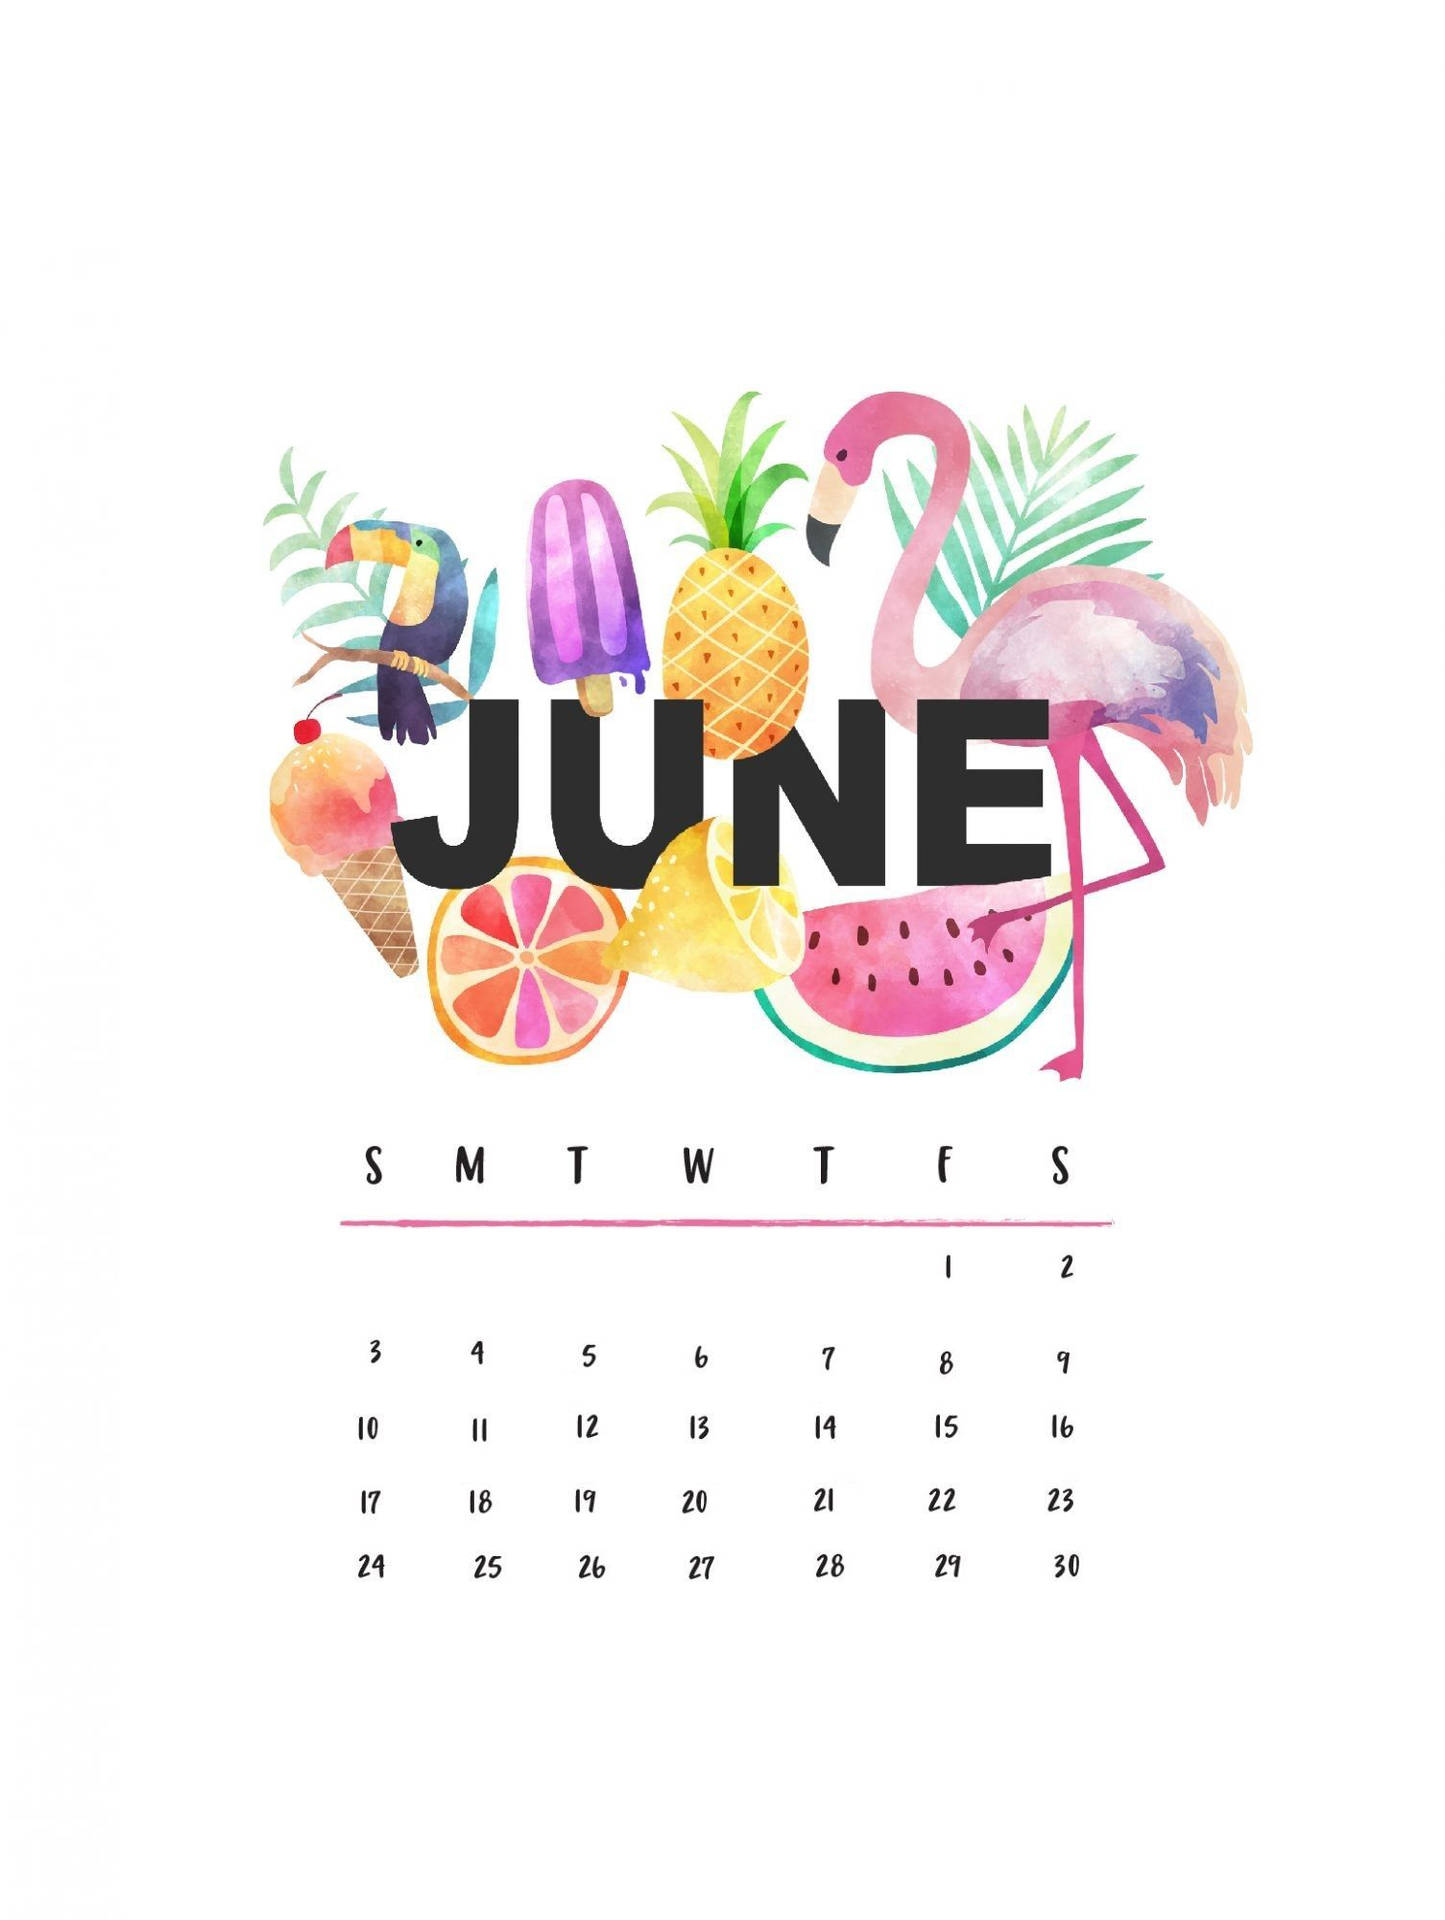 Get Inspired To Welcome June With A Colorful Summer Calendar! Background